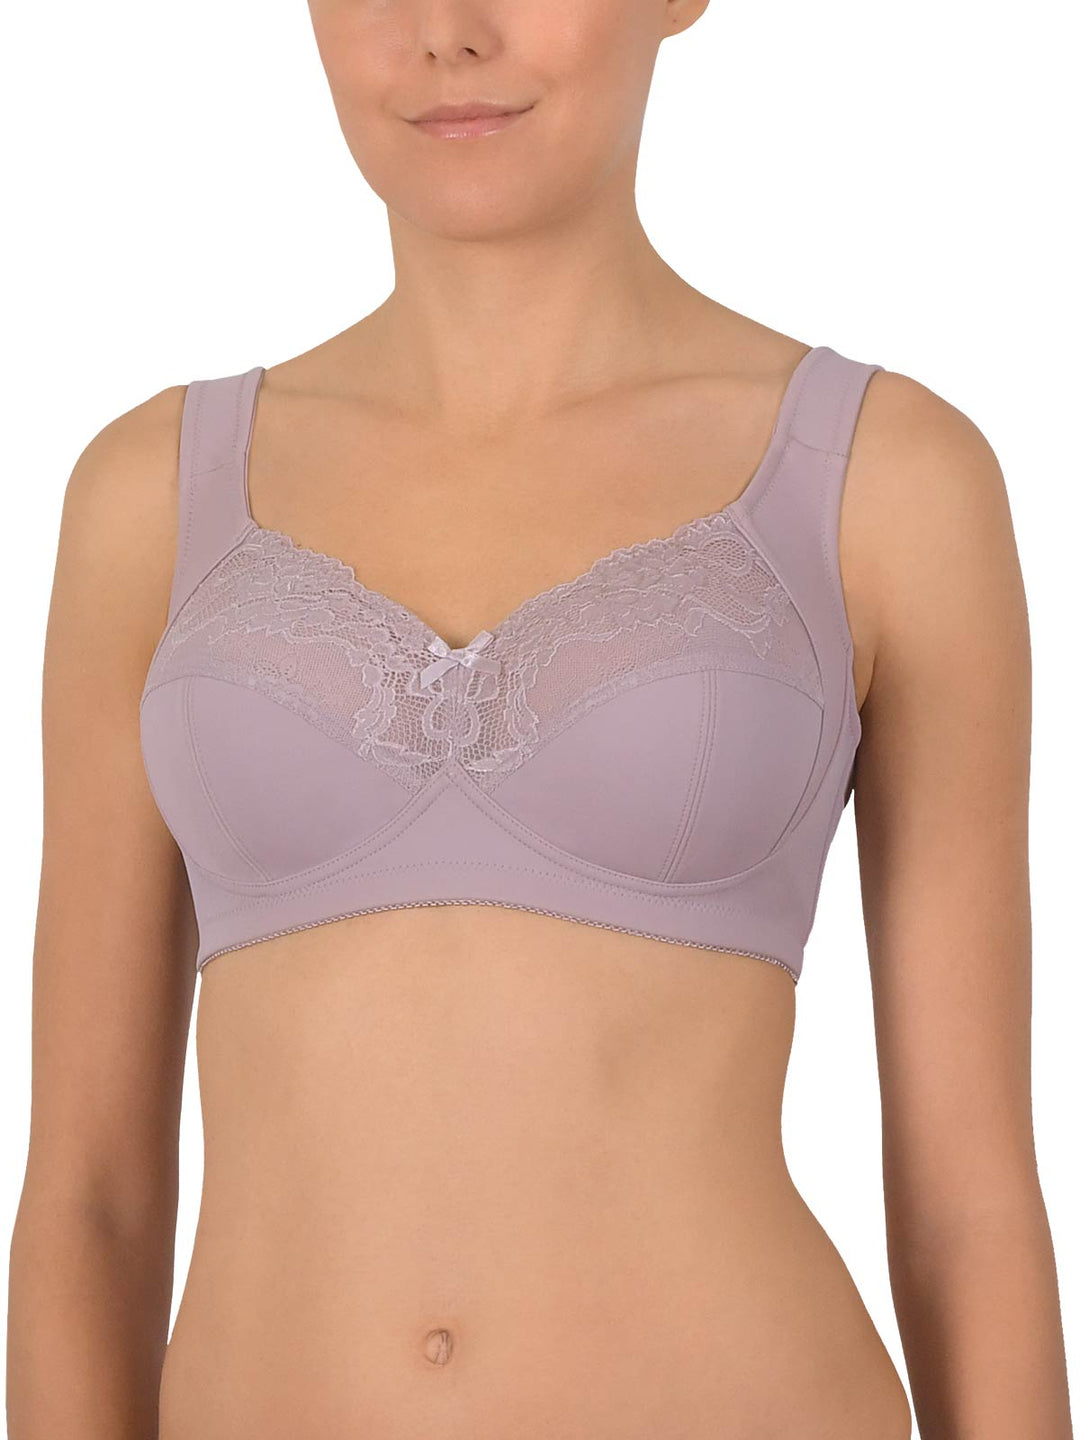 Naturana Non Wired T-Shirt Bra. Soft, Flexible Padded Cup. 28AA - 42D.  White